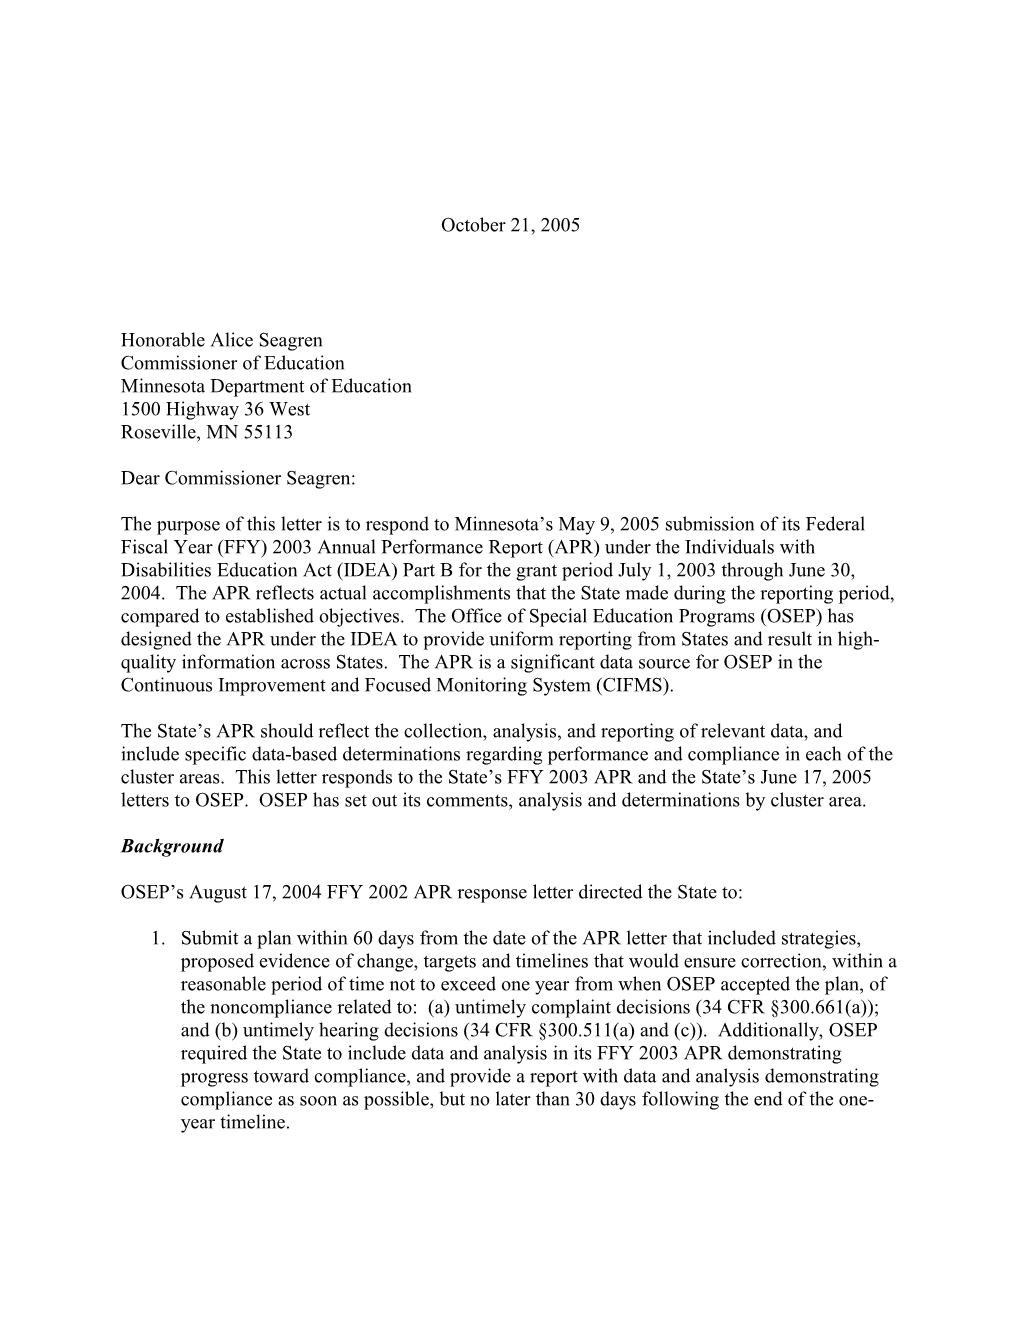 Minnesota Part B APR Letter for Grant Year 2003-2004 (Msword)